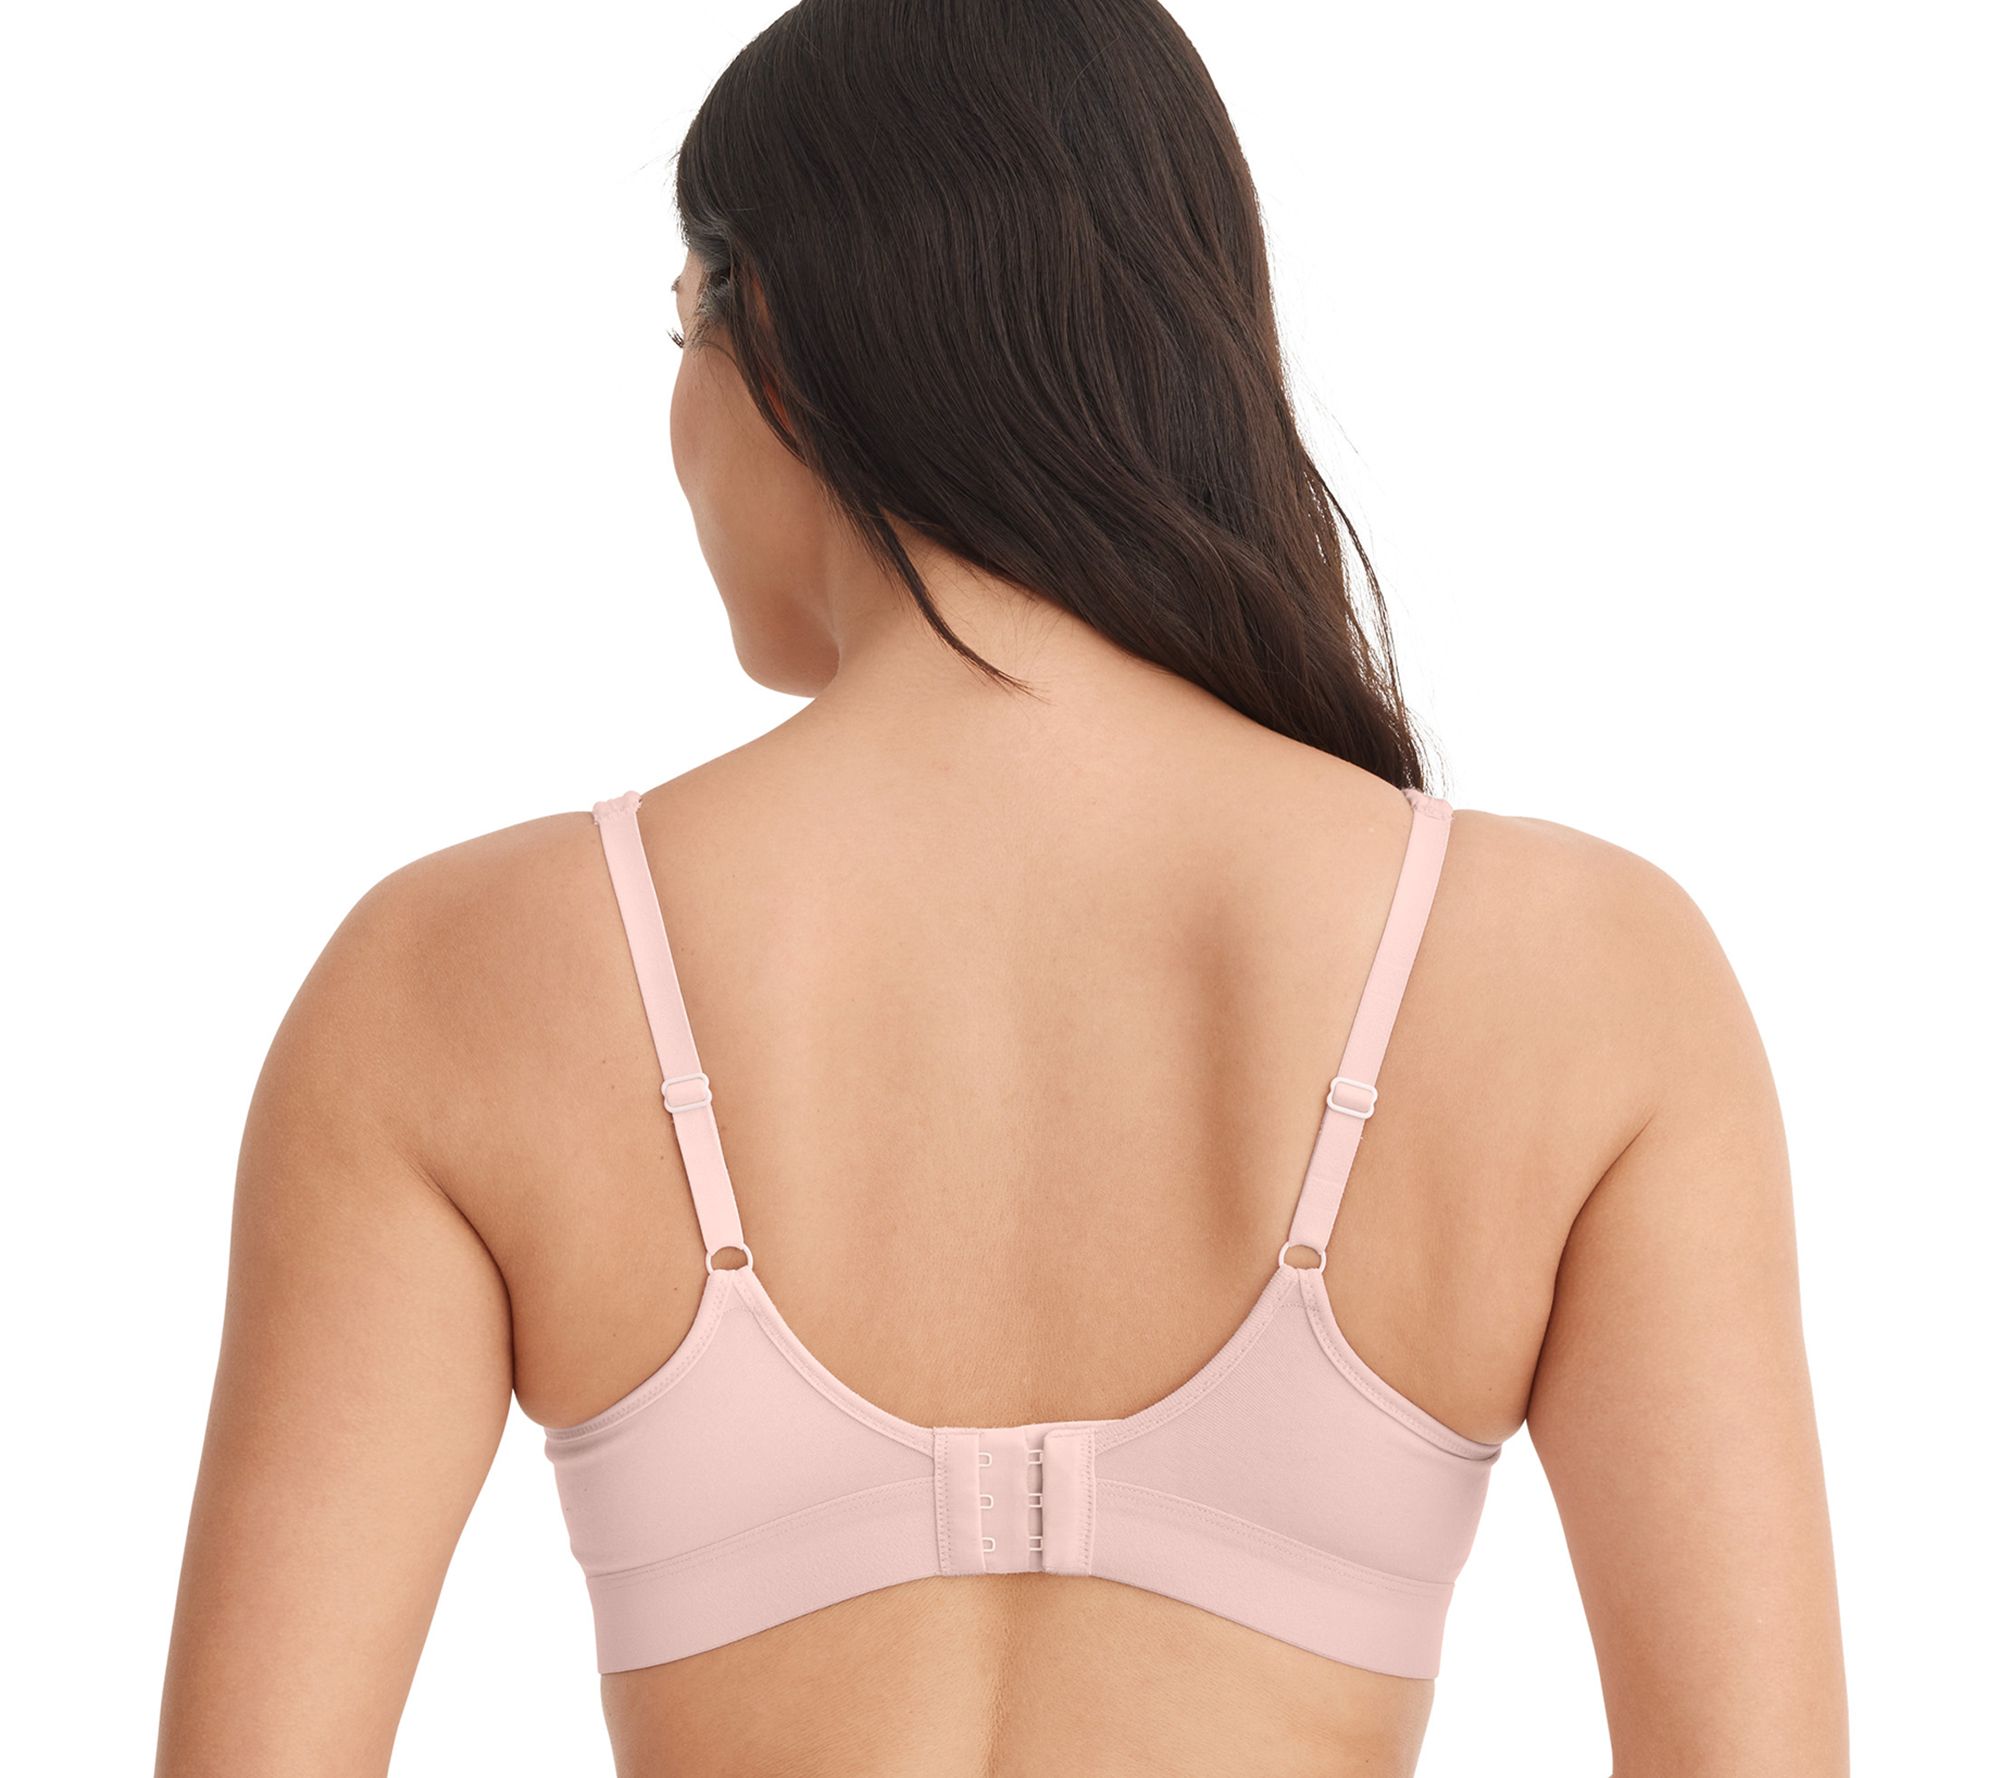 Mrat Clearance Front Closure Bras for Women Large Padded Underwear